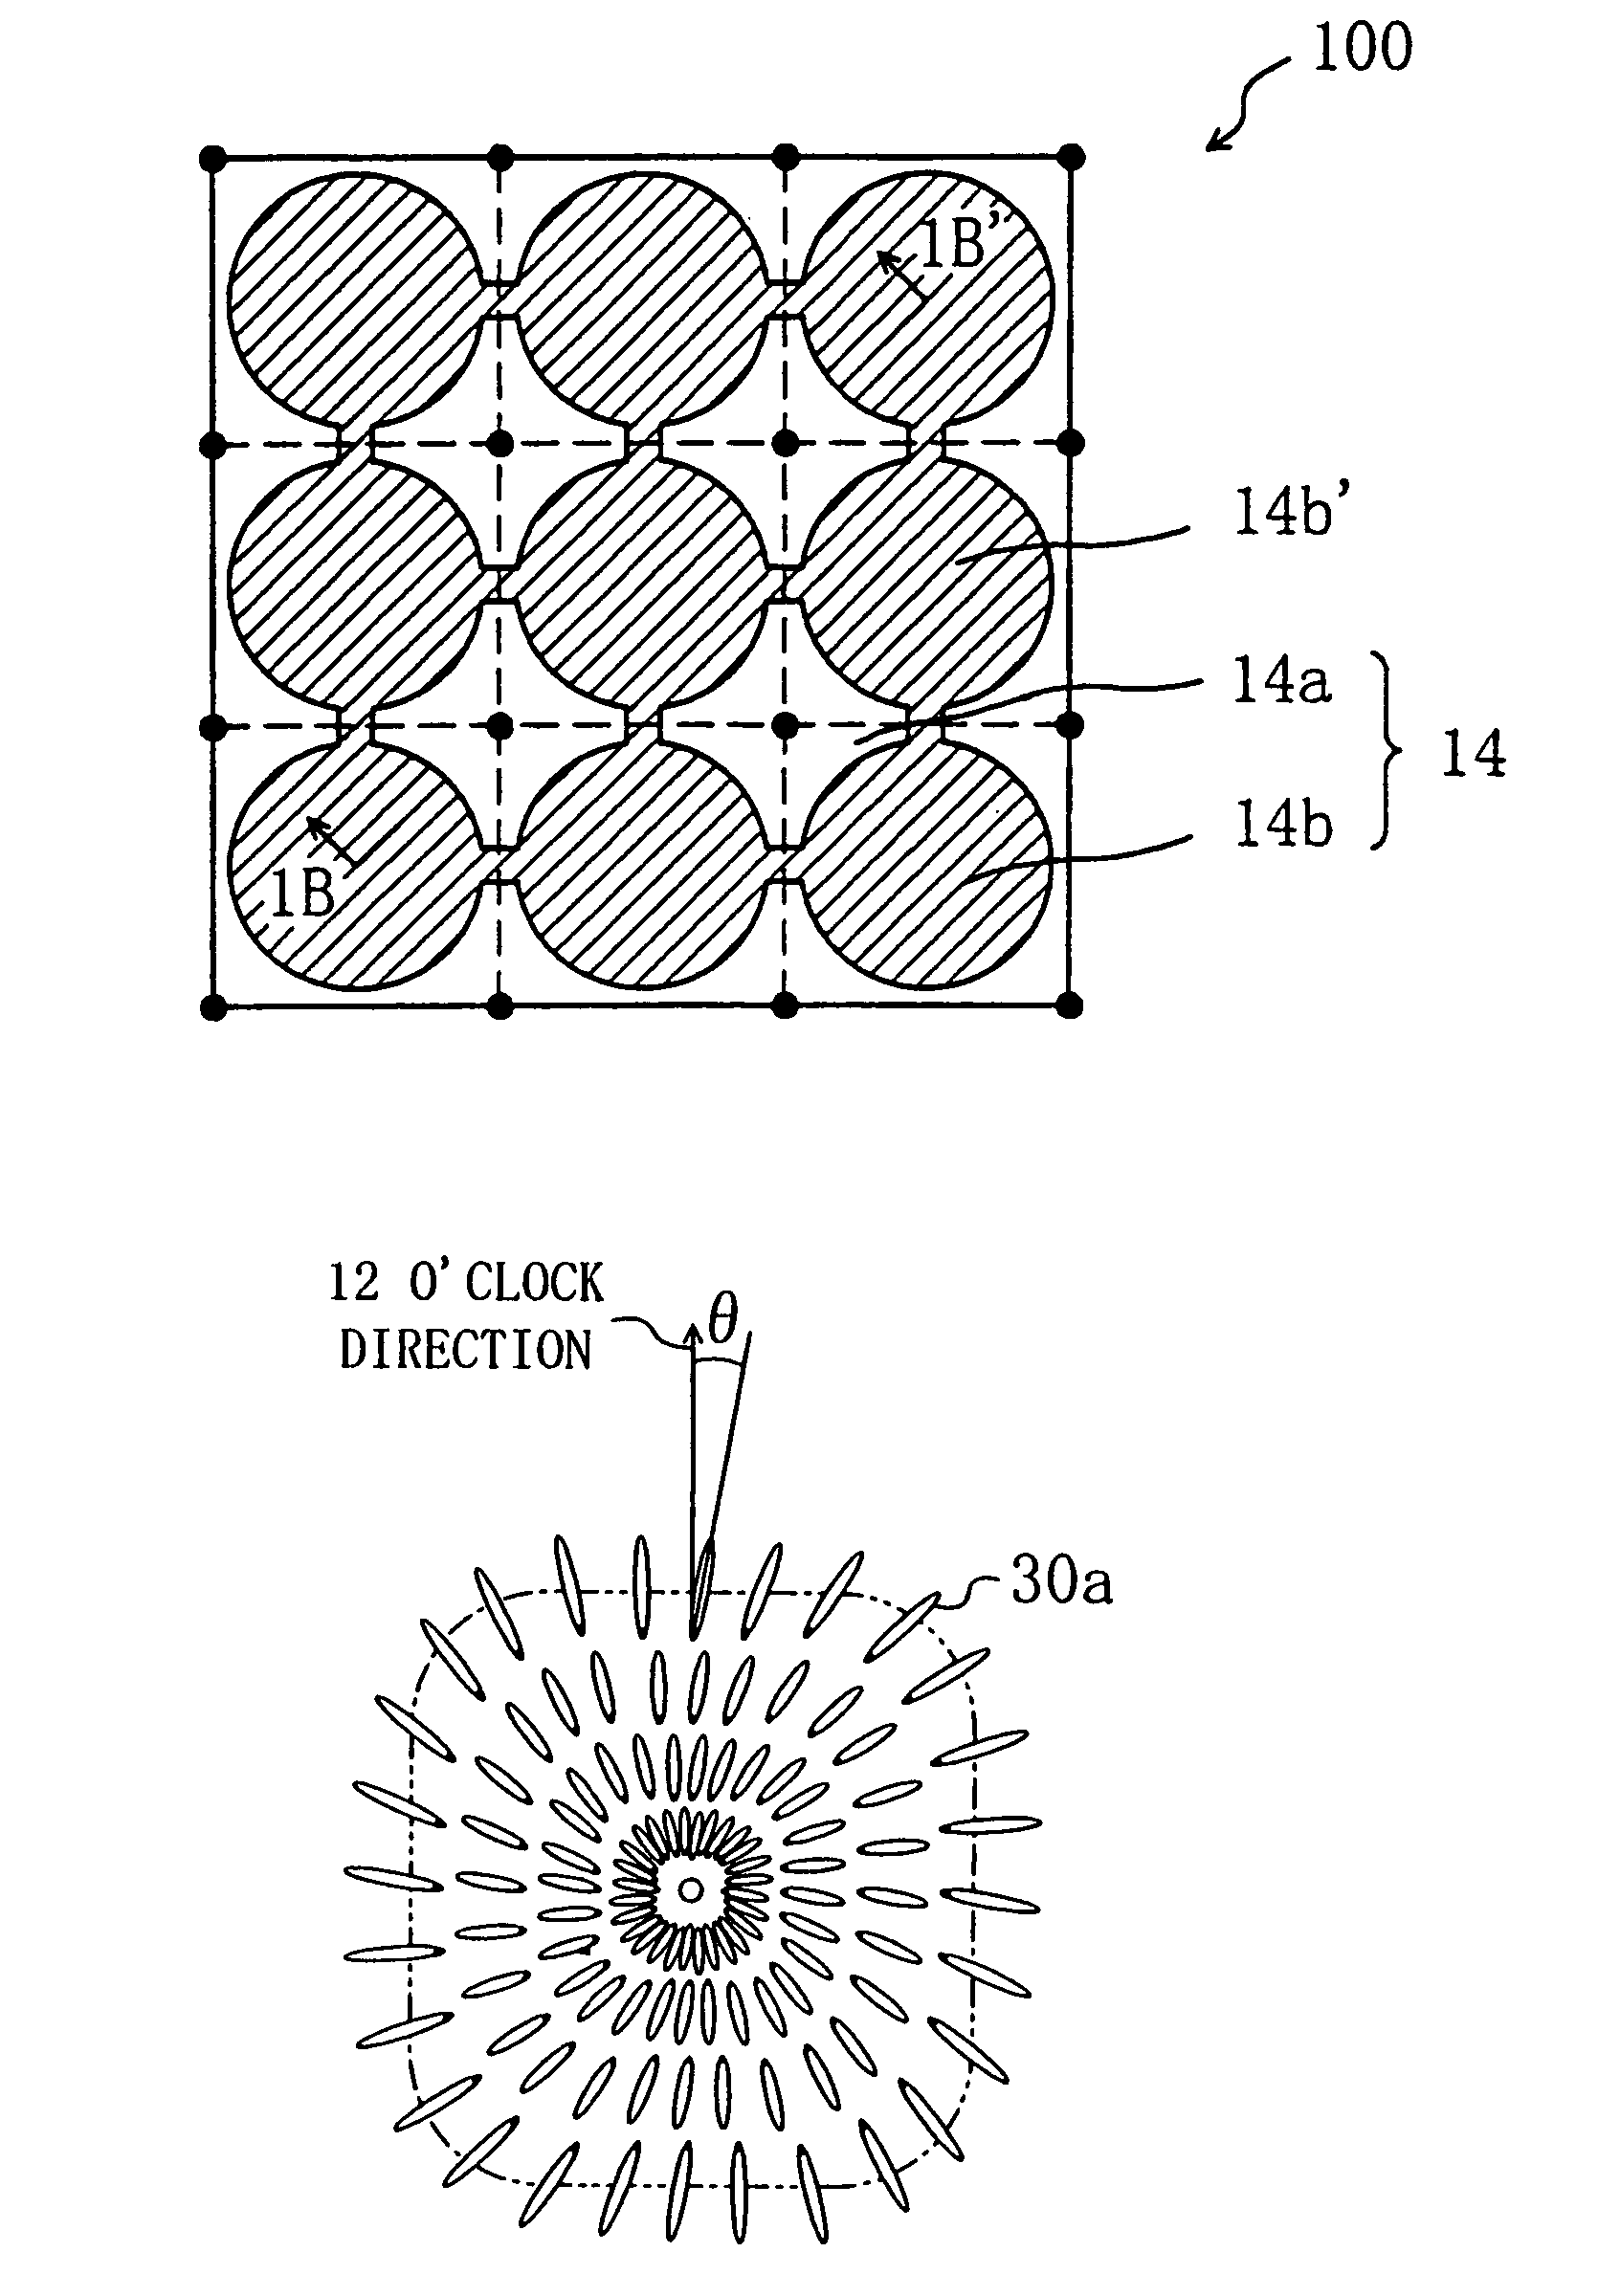 Liquid crystal display device having multiple domains with radially inclined LC molecules